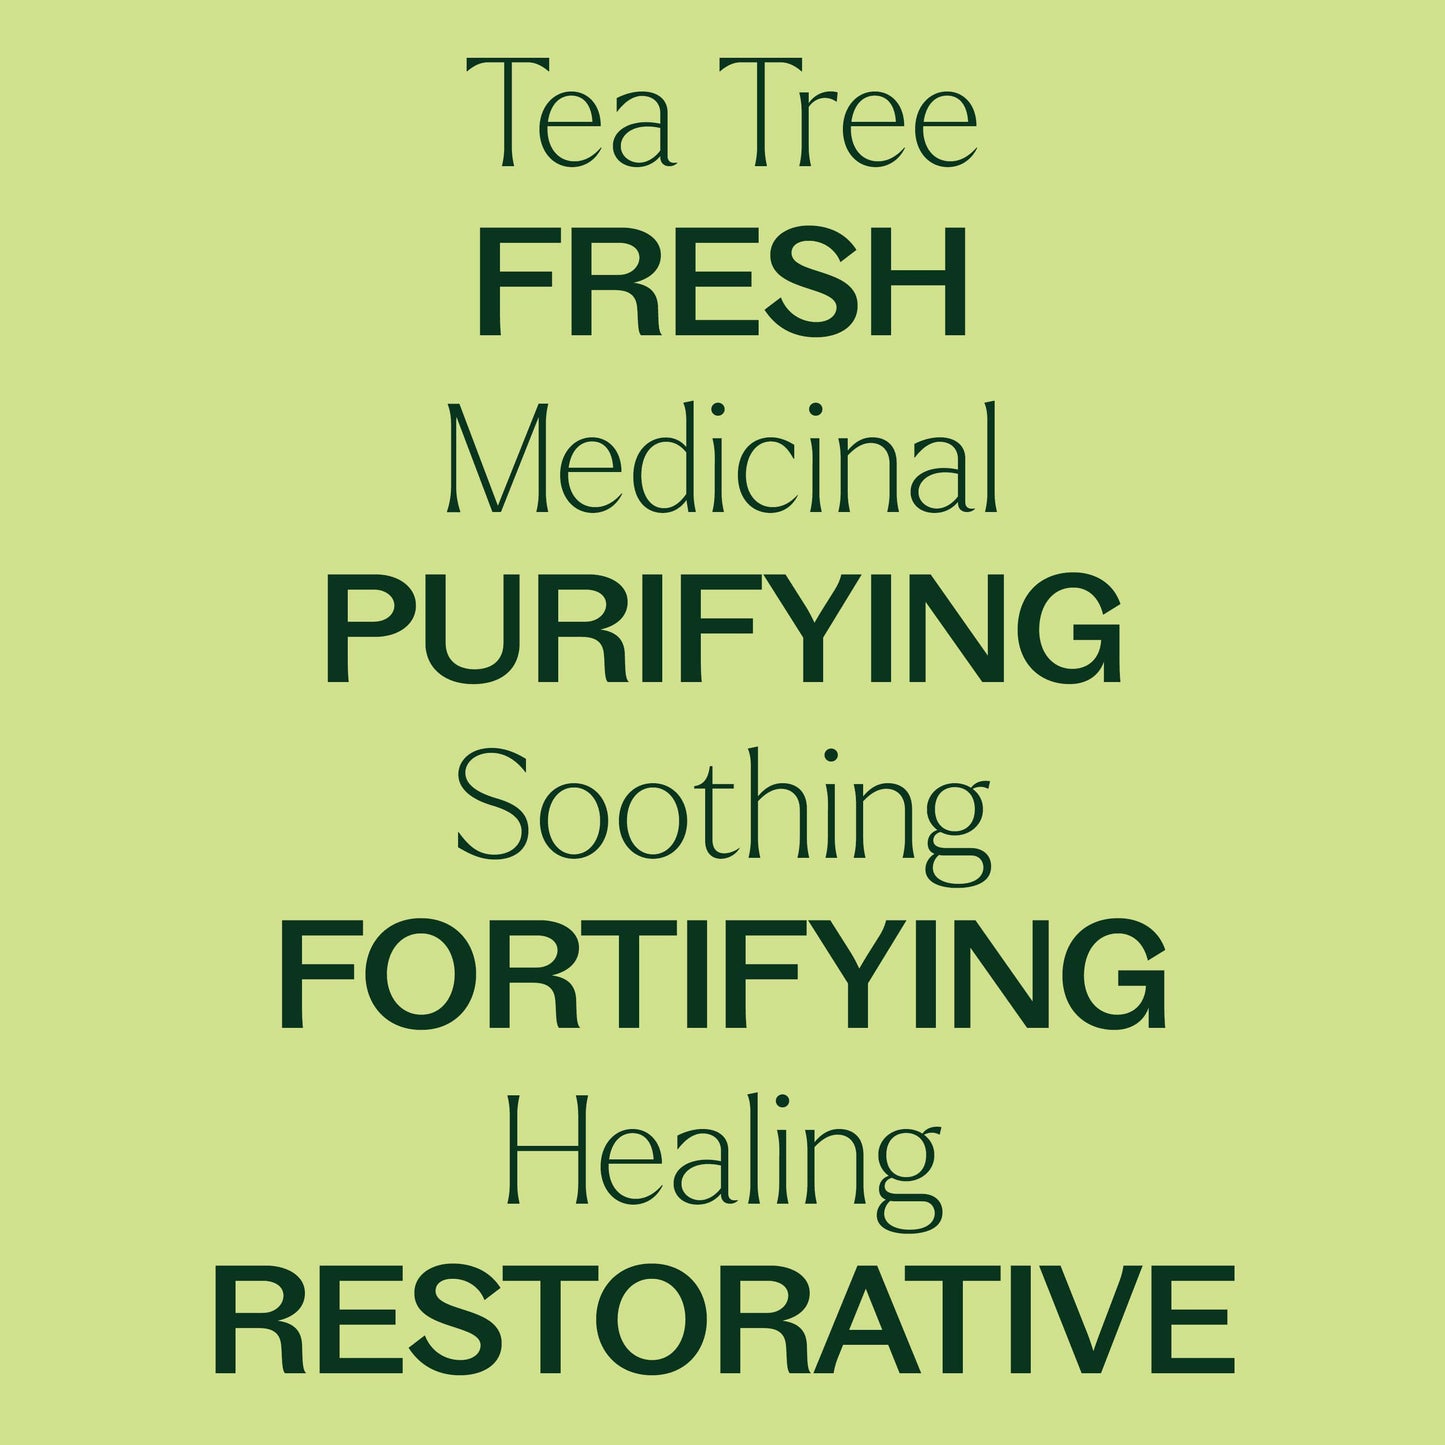 tea tree body oil is fresh, medicinal, purifying, soothing, fortifying, healing, and restorative